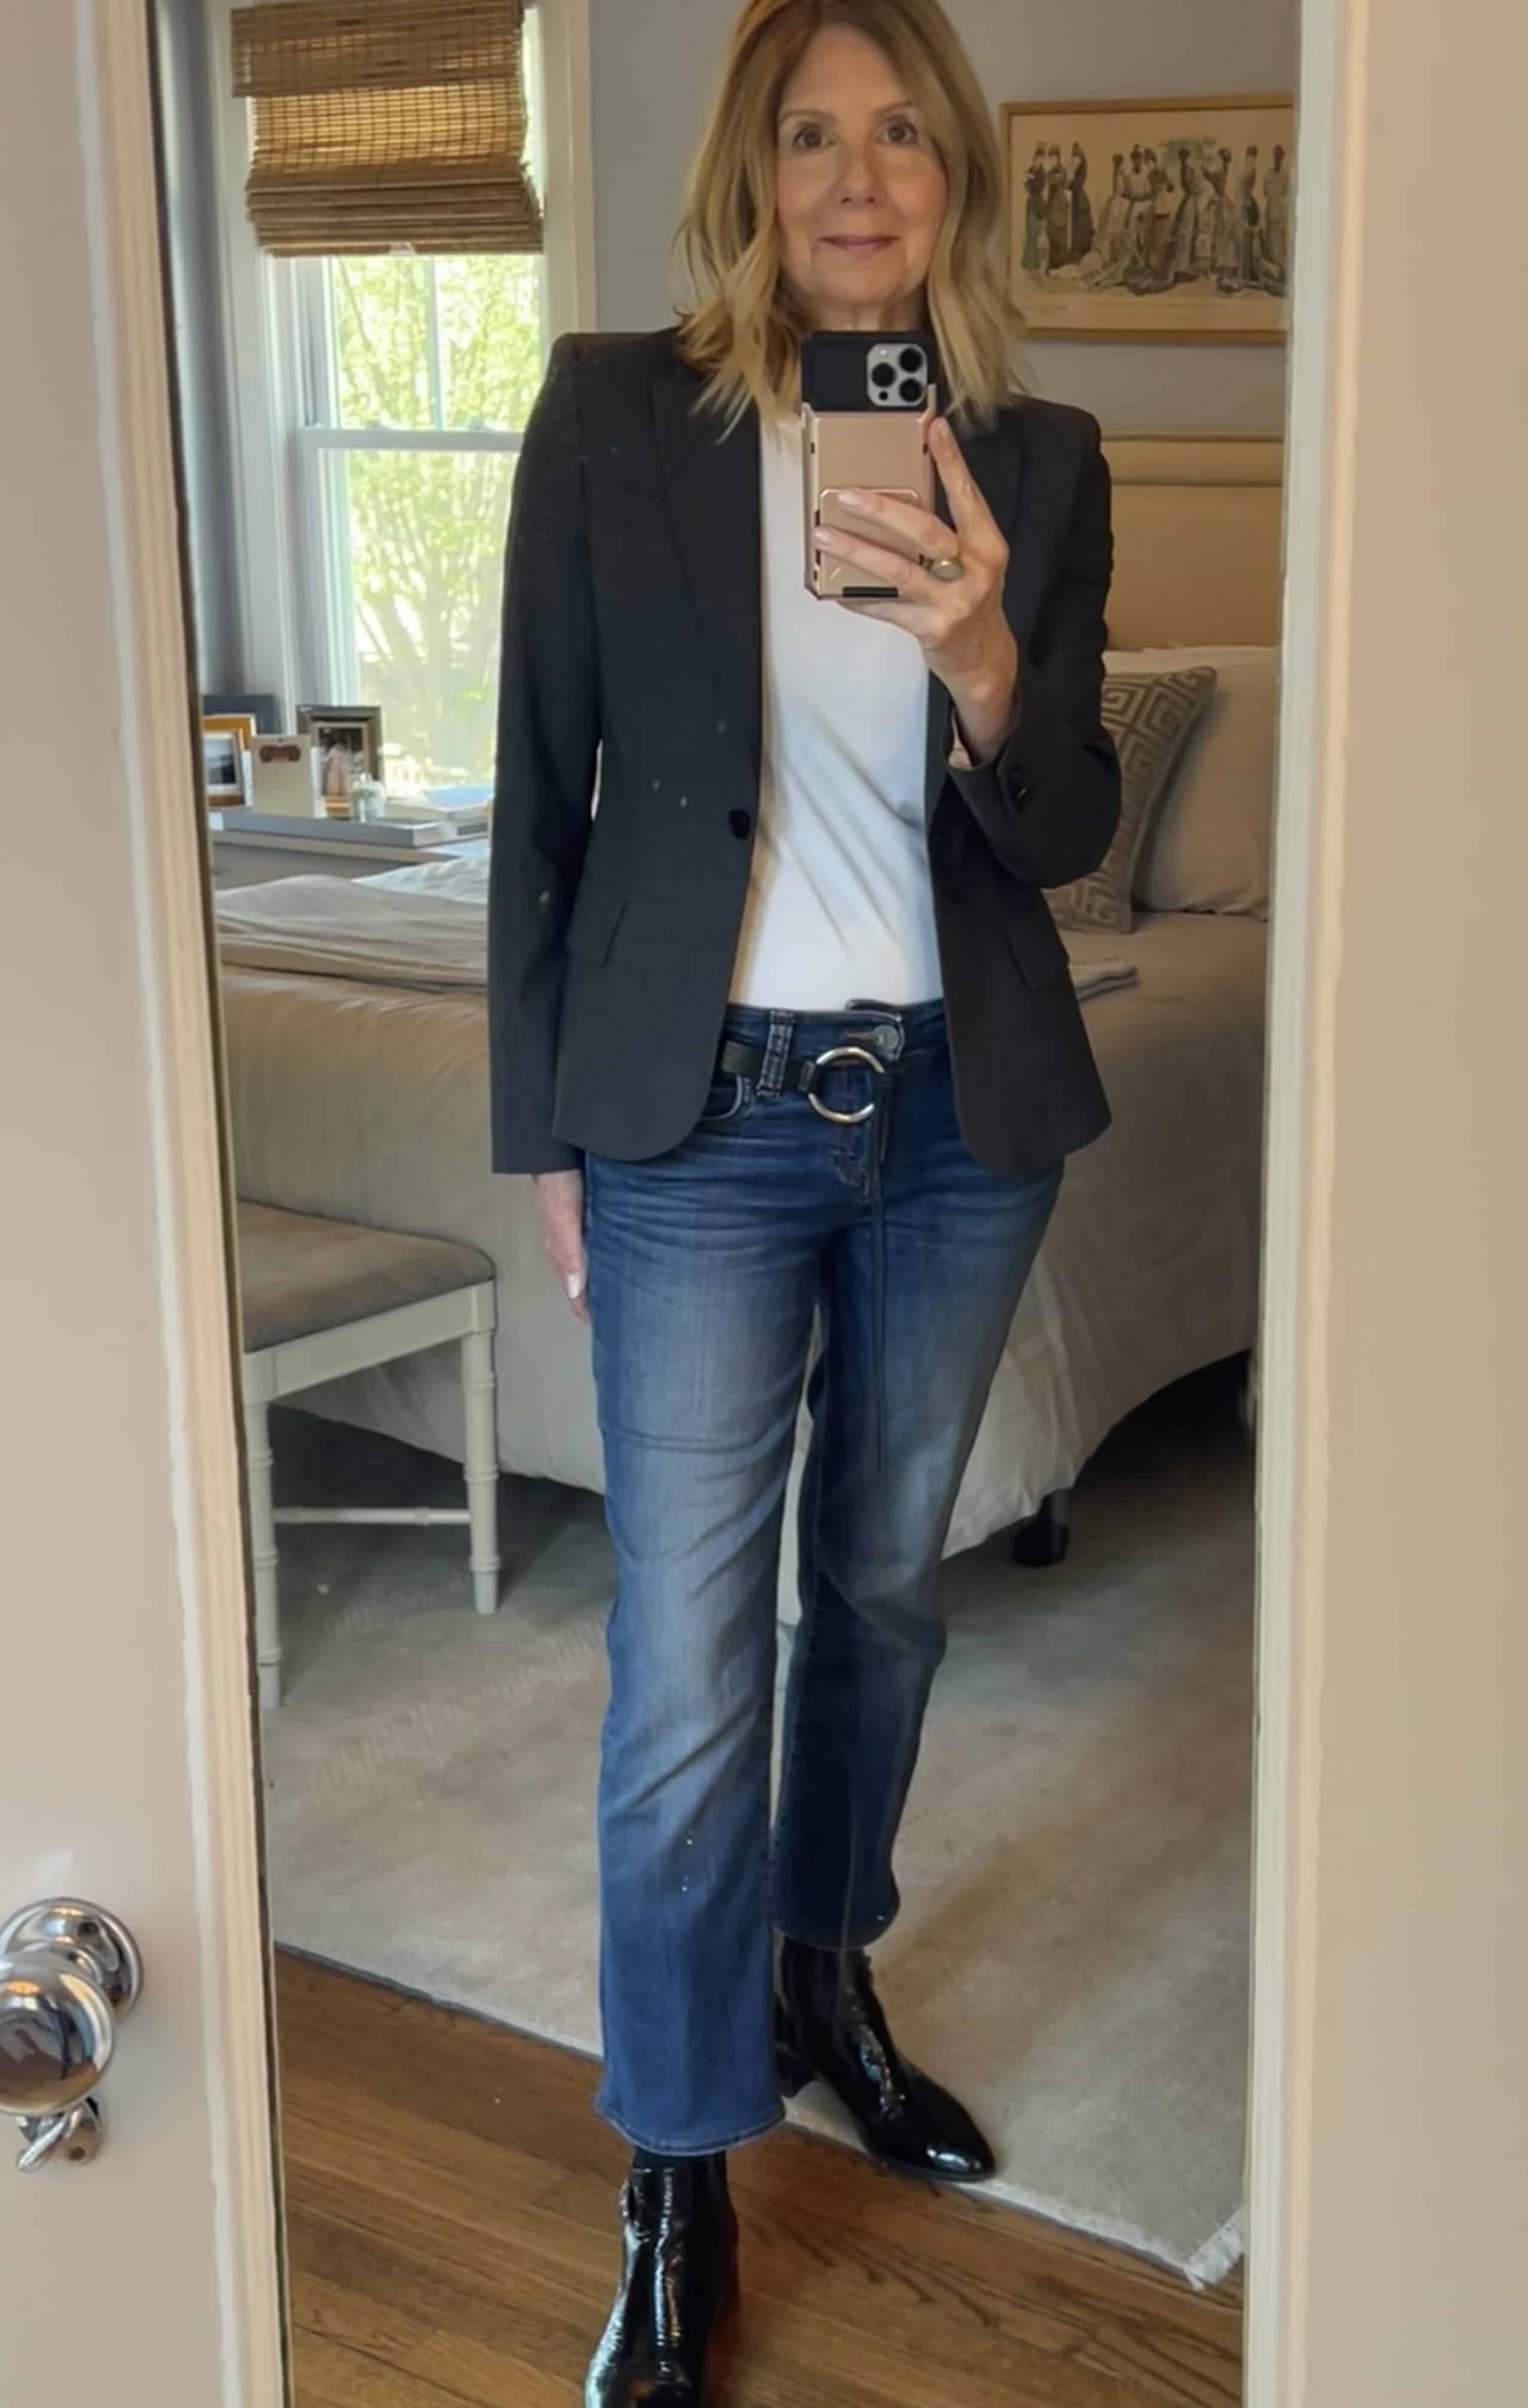 Photo of a woman wearing a grey blazer, white t-shirt and jeans.